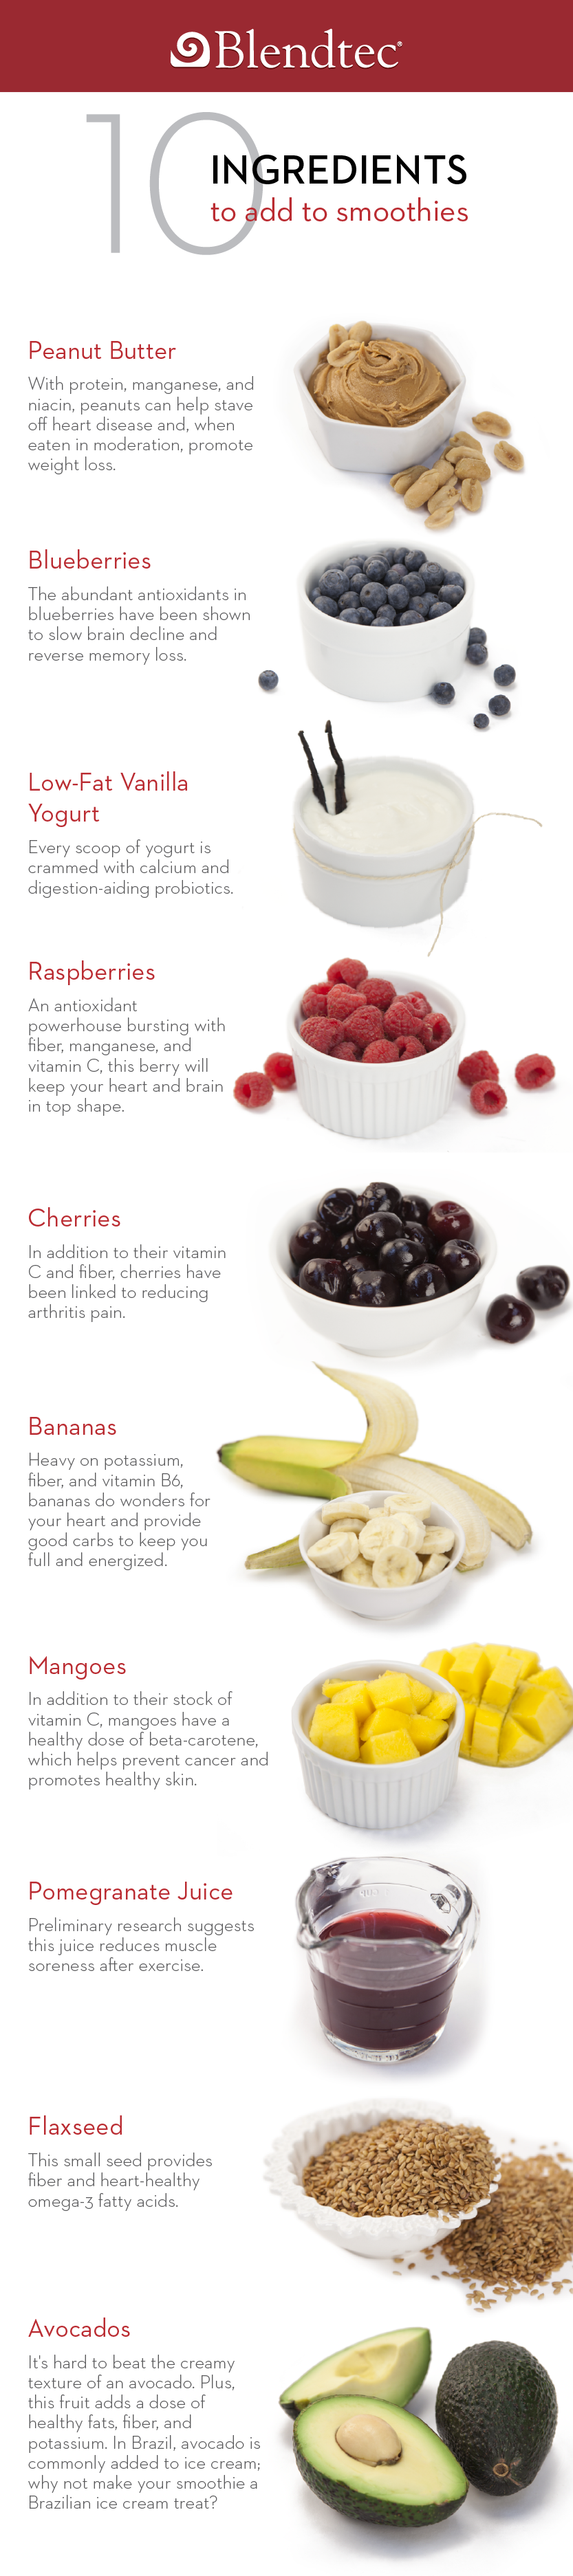 Unique Things to Add to Your Smoothies